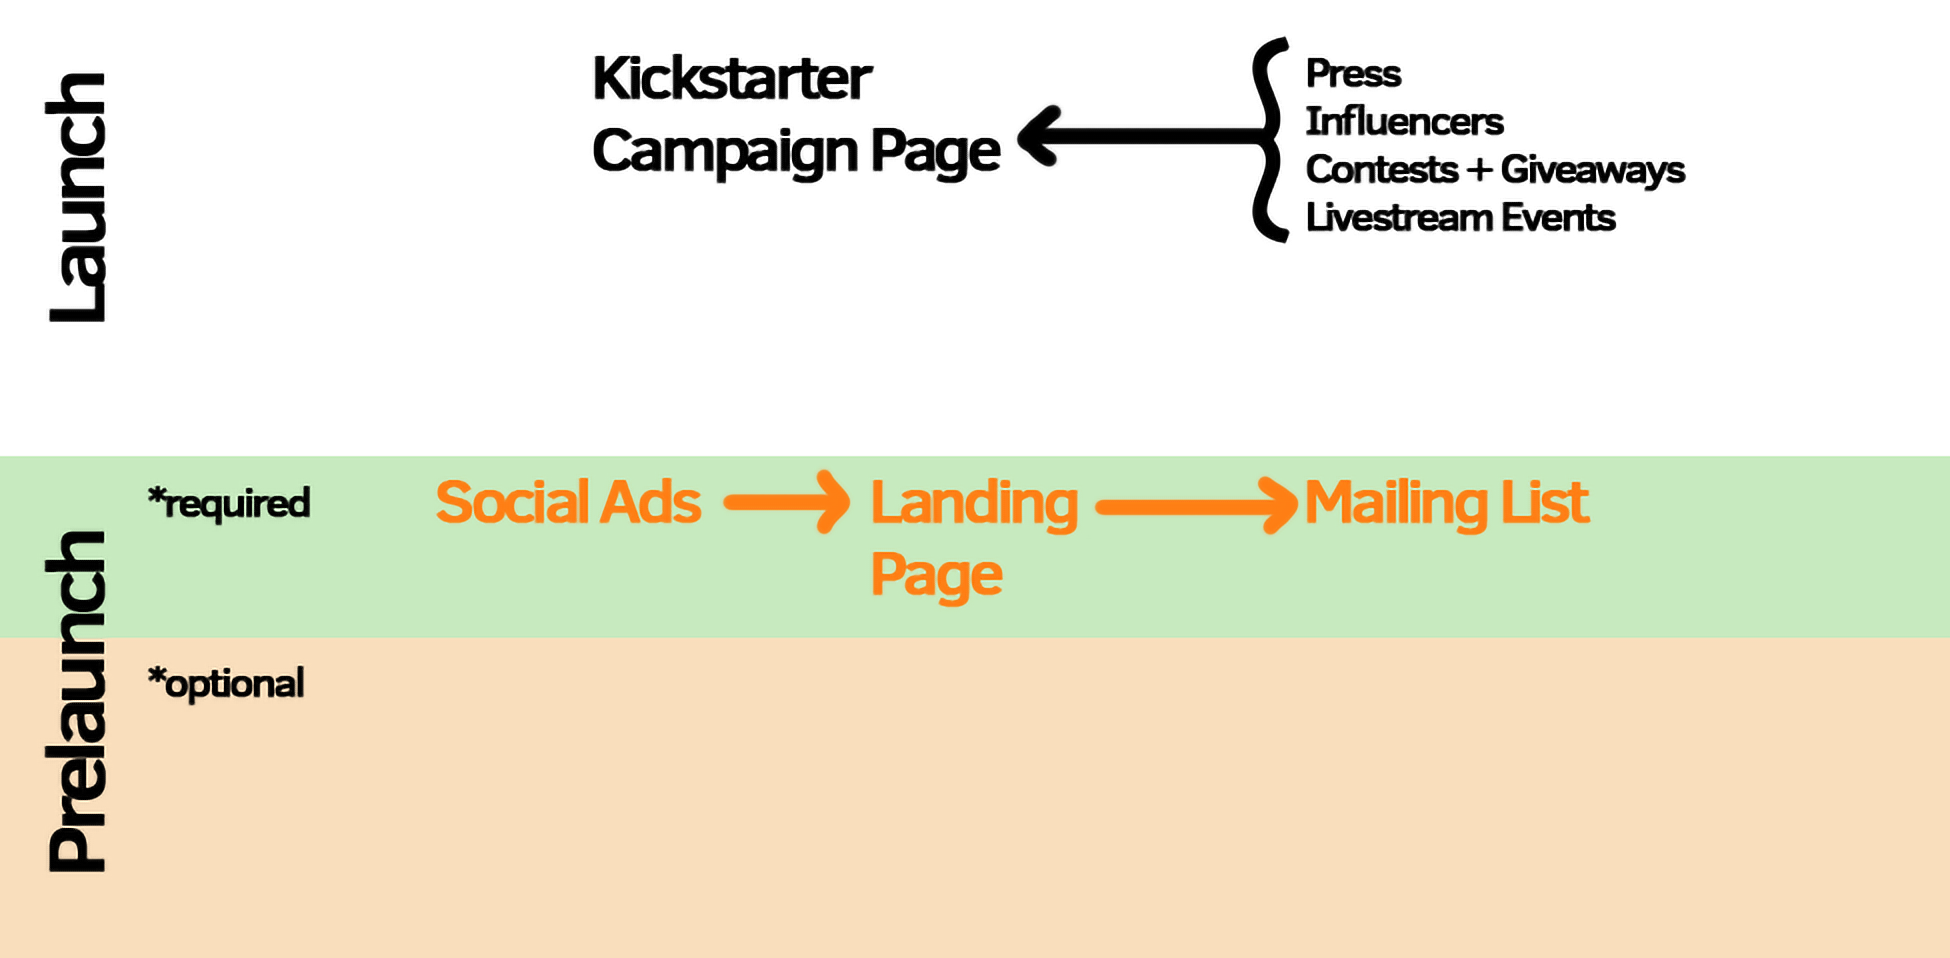 Overview of Landing Page Funnel